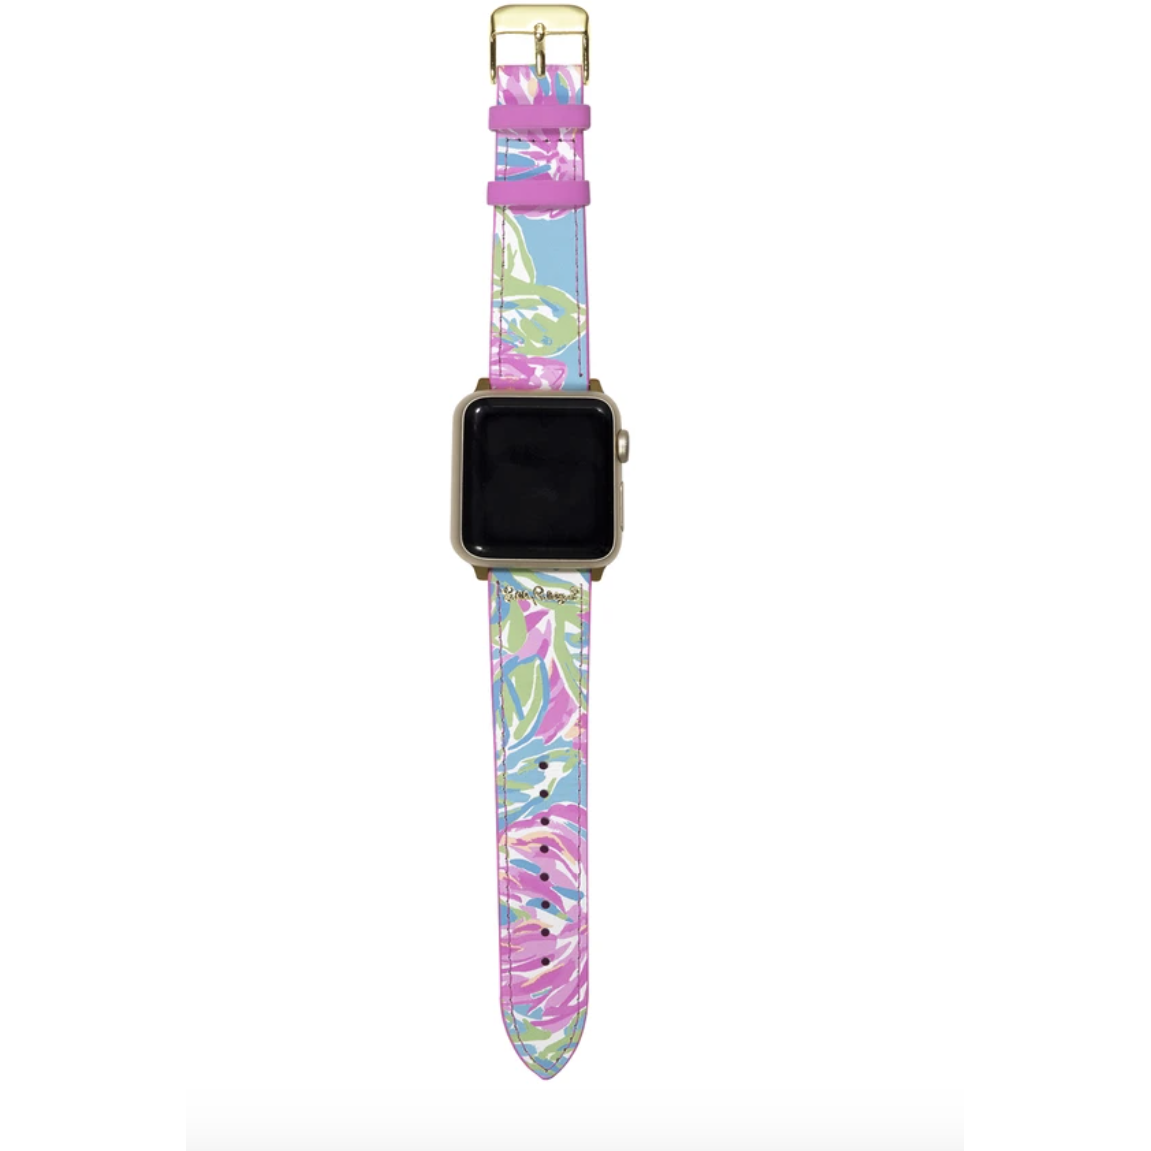 Lilly Pulitzer apple watch band